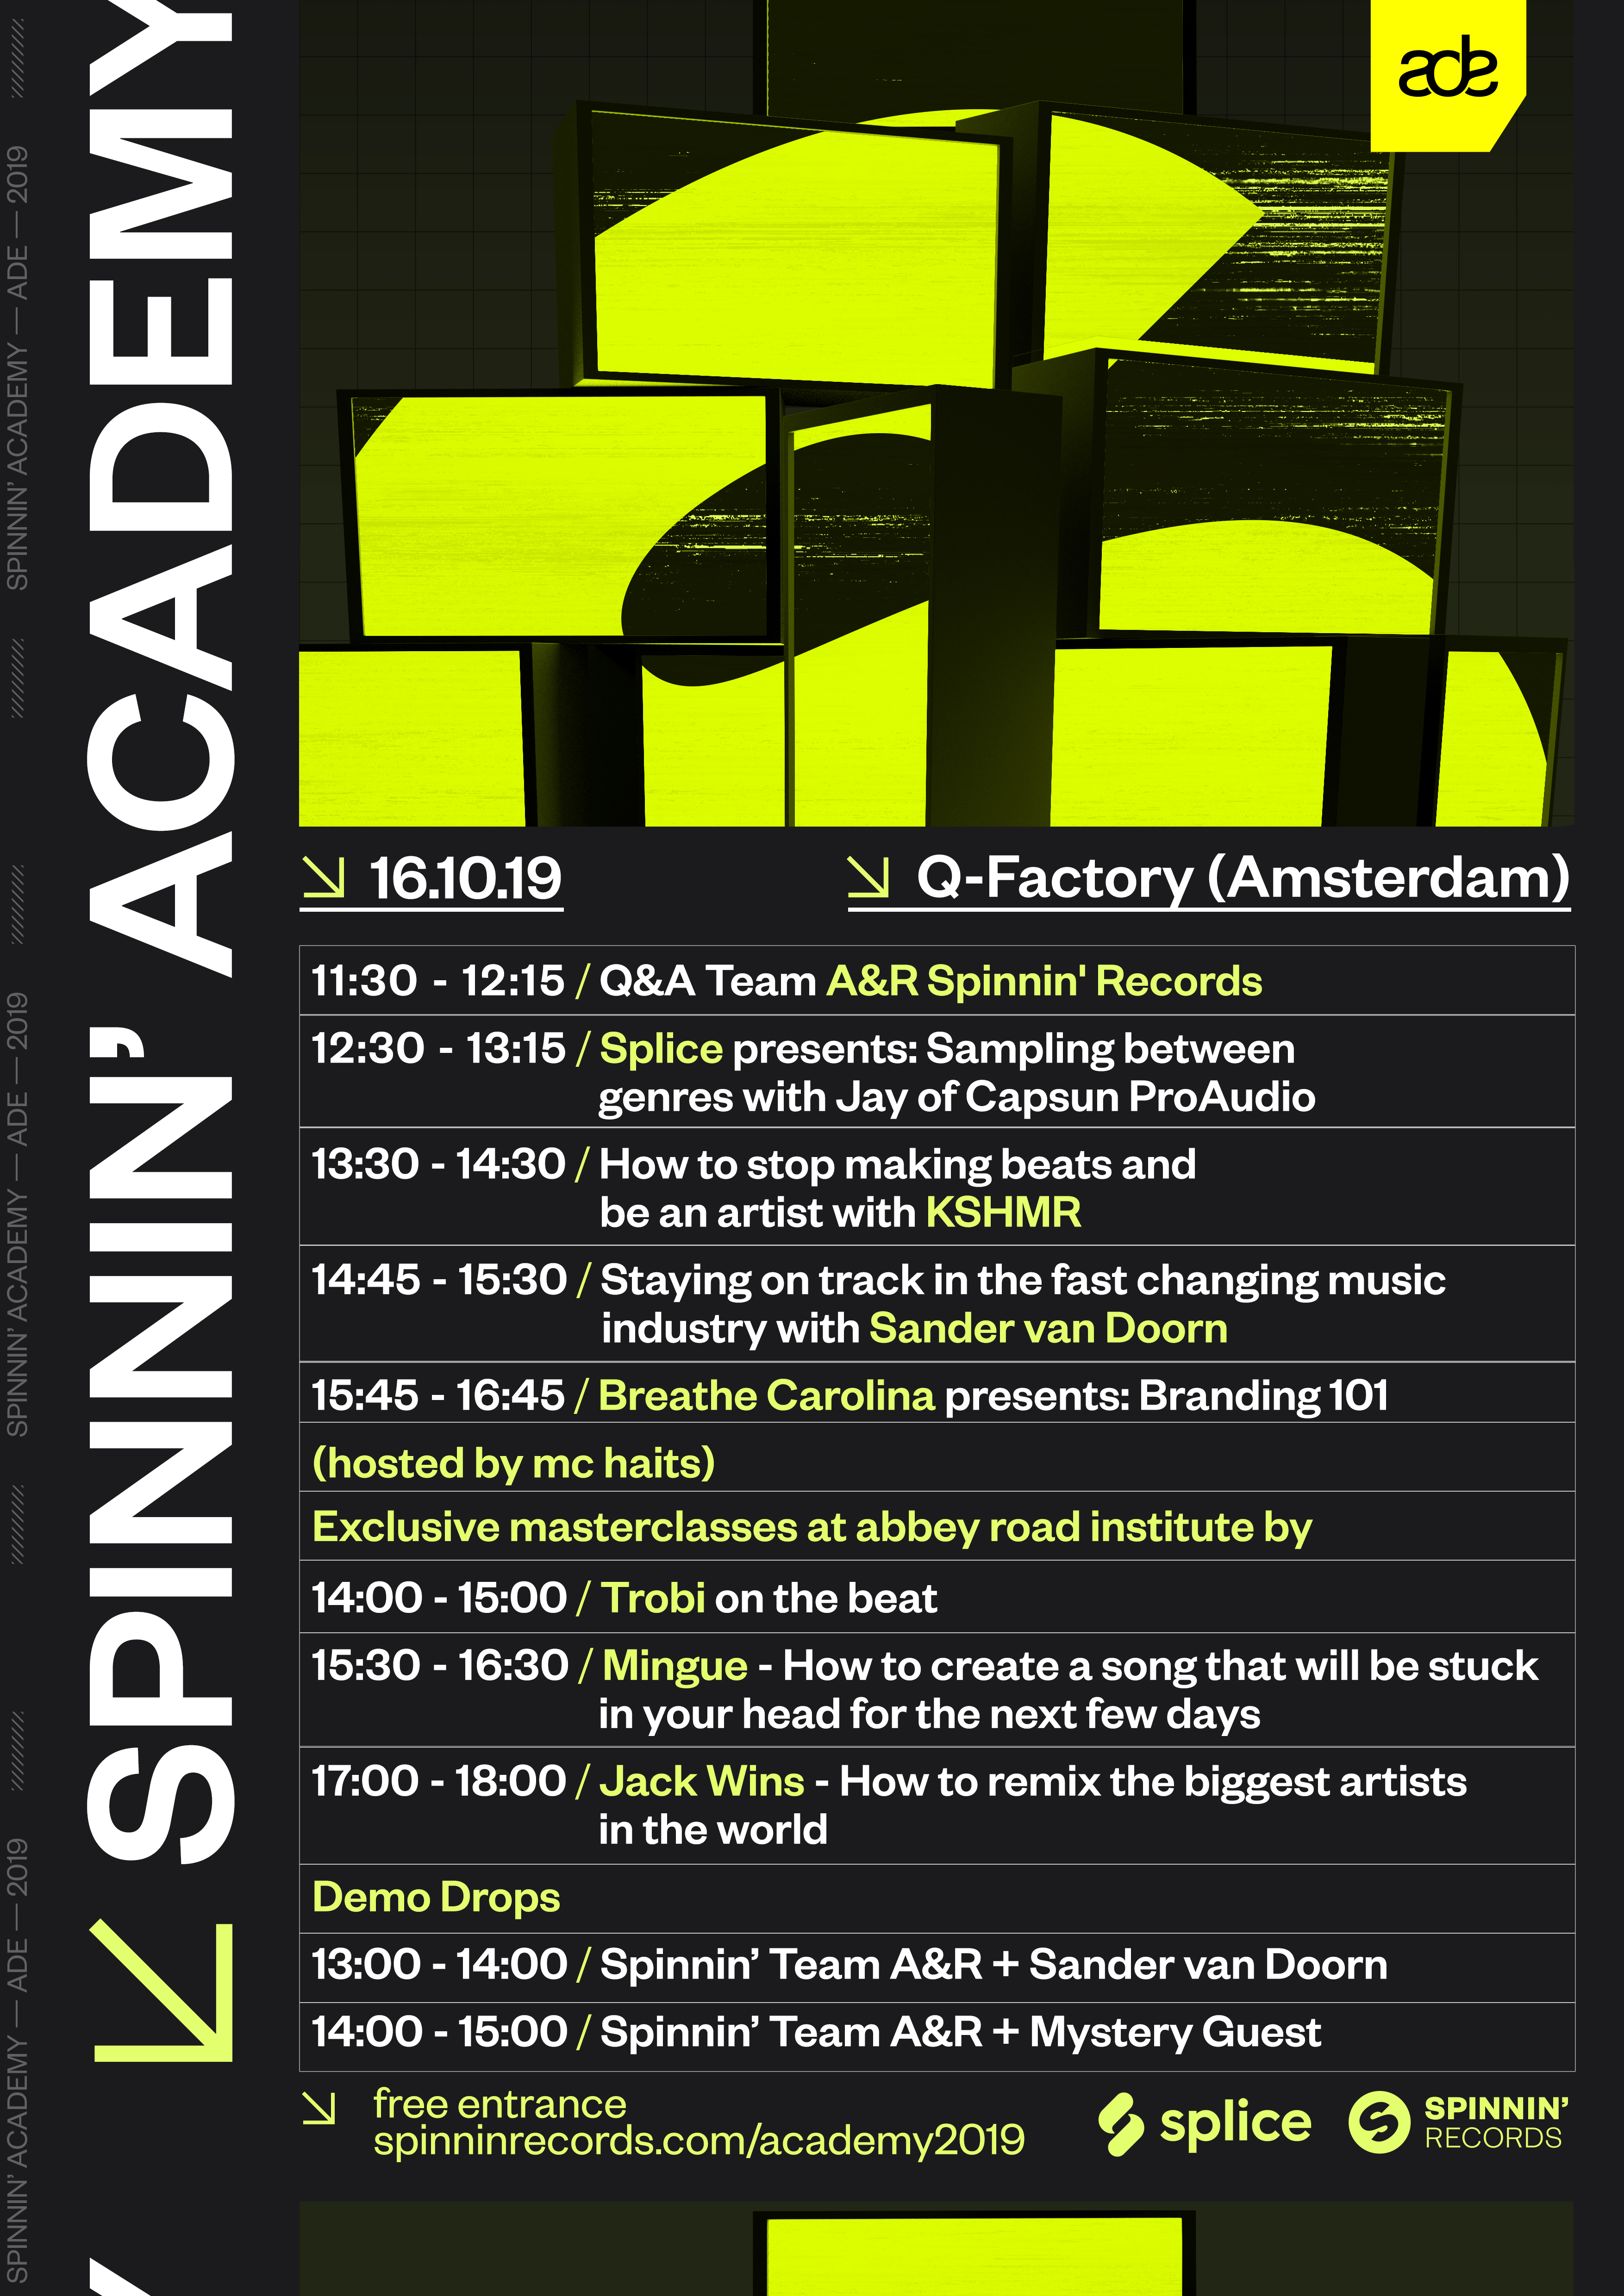 Spinnin Academy Amsterdam Dance Event Spinnin Records Spinnin' records official open code repositories. spinnin records